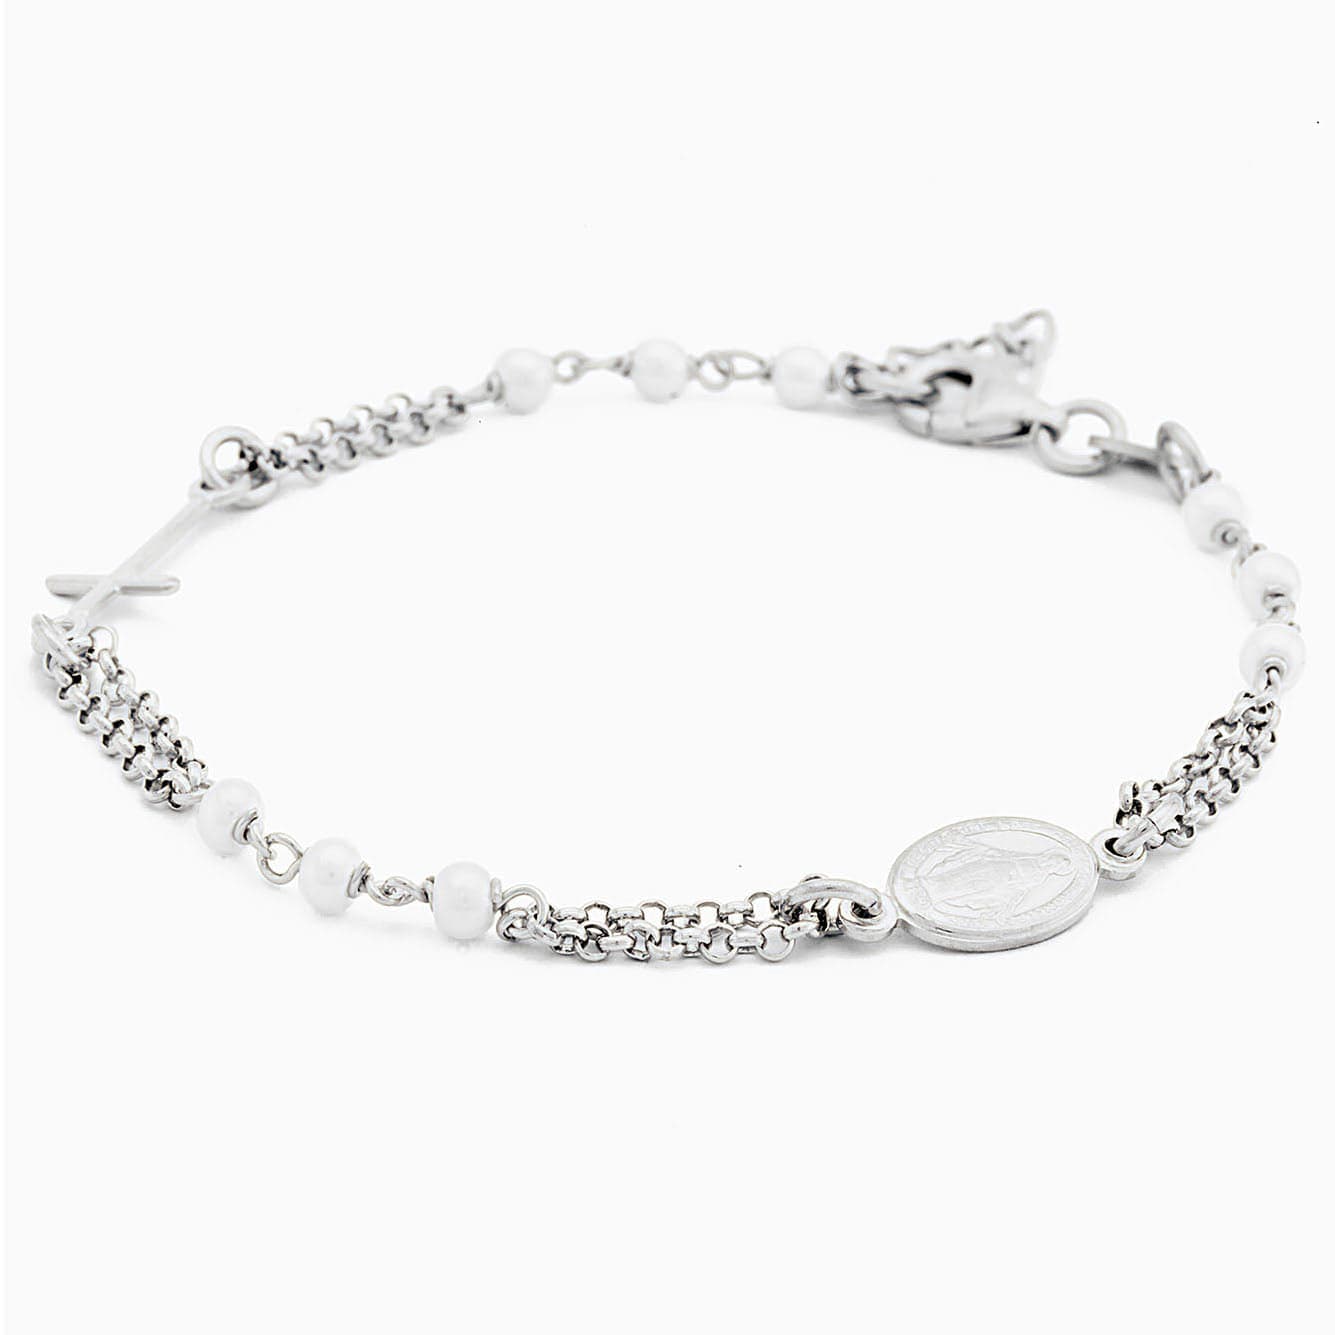 MONDO CATTOLICO Prayer Beads Rhodium / Cm 17.5 (6.9 in) STERLING SILVER ROSARY BRACELET SYNTHETIC PEARL FACETED BEADS